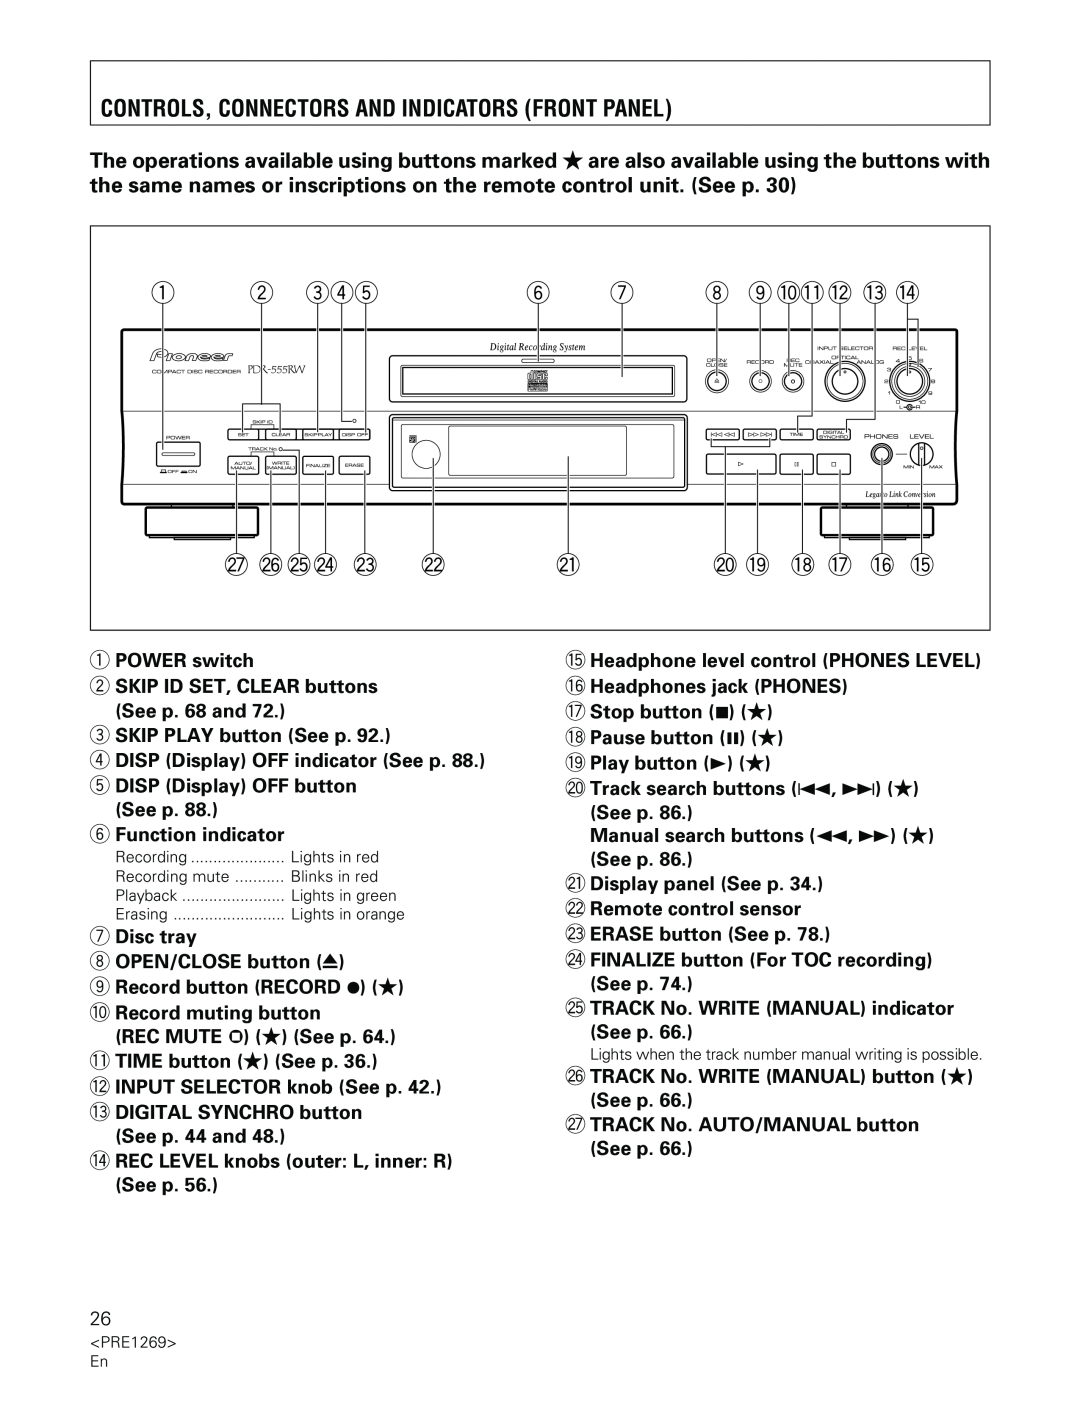 Pioneer PDR-555RW operating instructions Controls, Connectors And Indicators Front Panel 